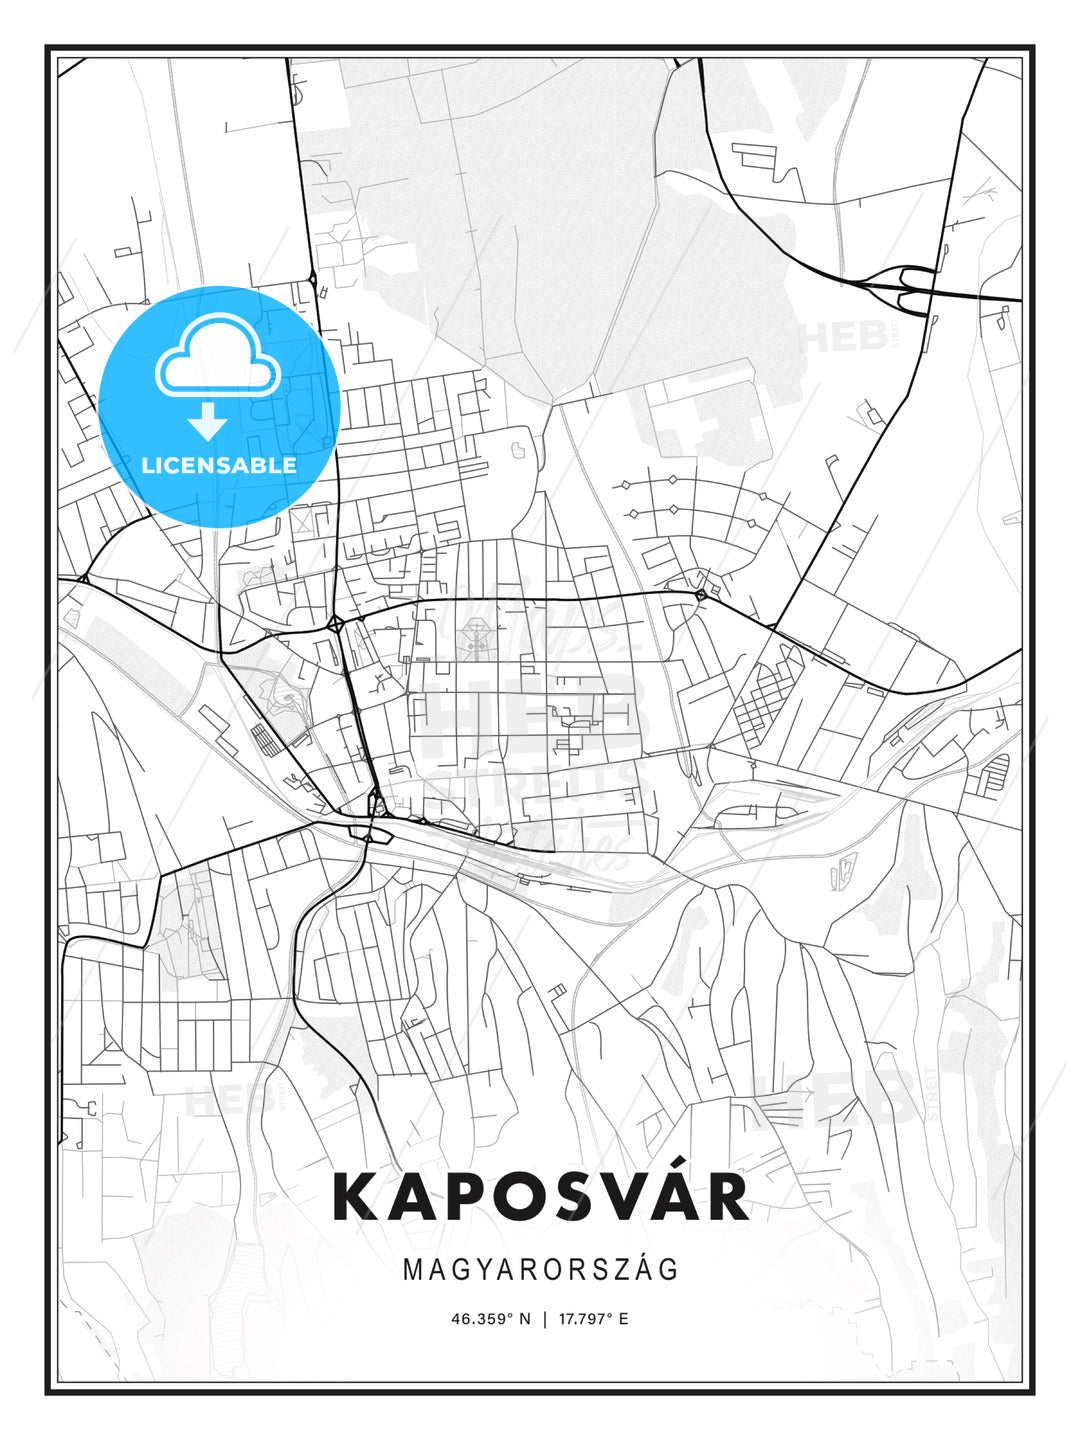 Kaposvár, Hungary, Modern Print Template in Various Formats - HEBSTREITS Sketches